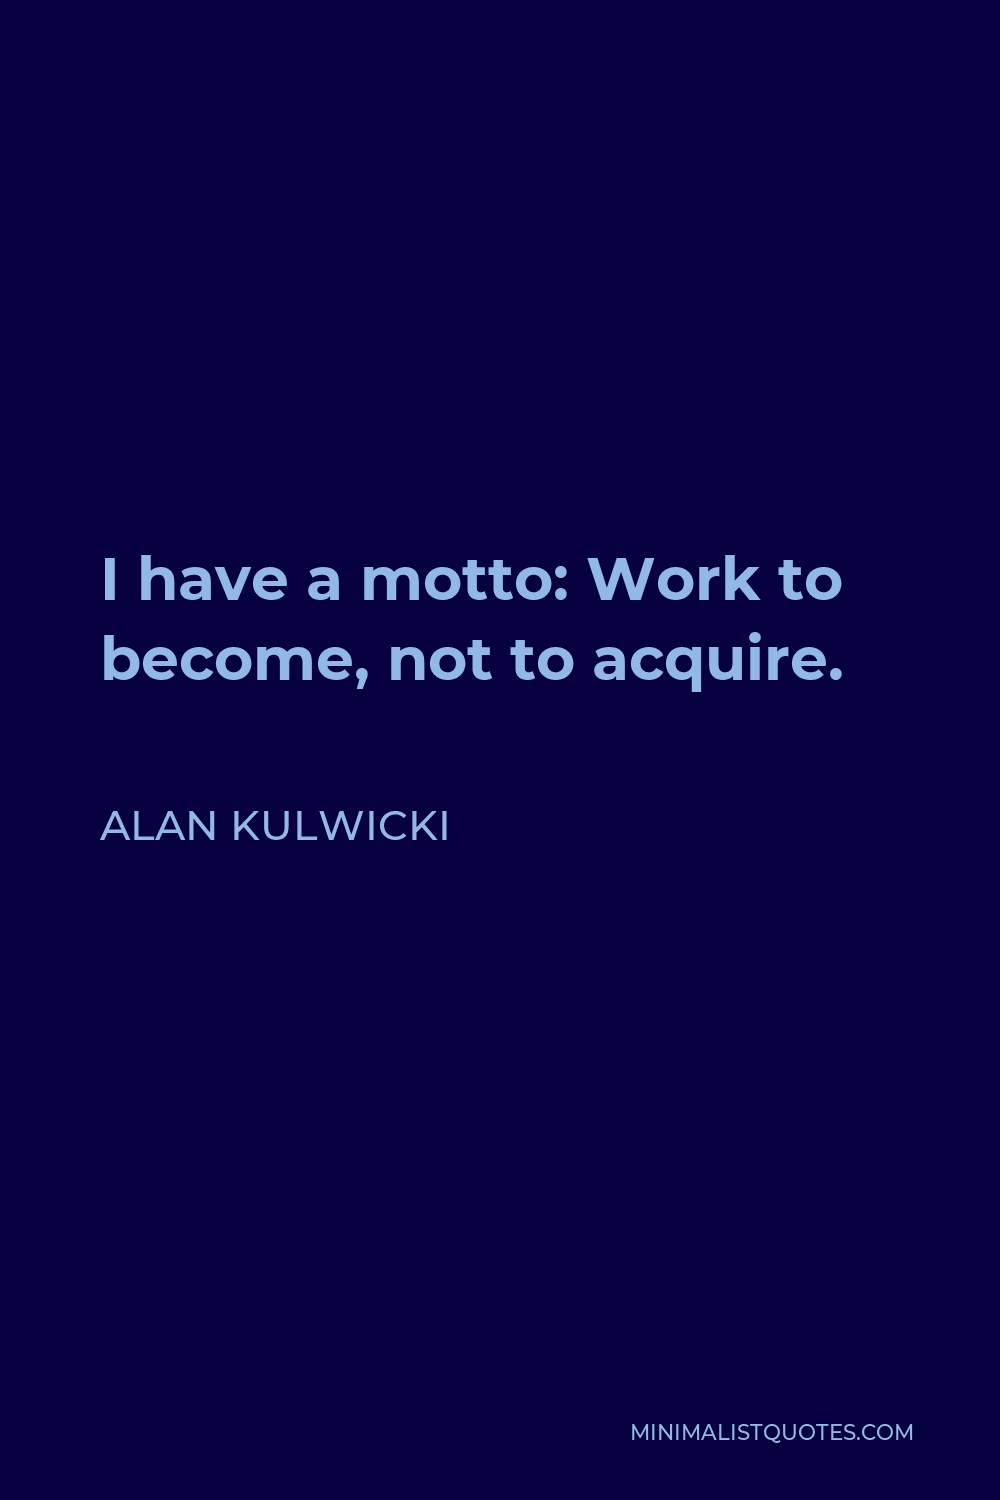 Alan Kulwicki Quote - I have a motto: Work to become, not to acquire.